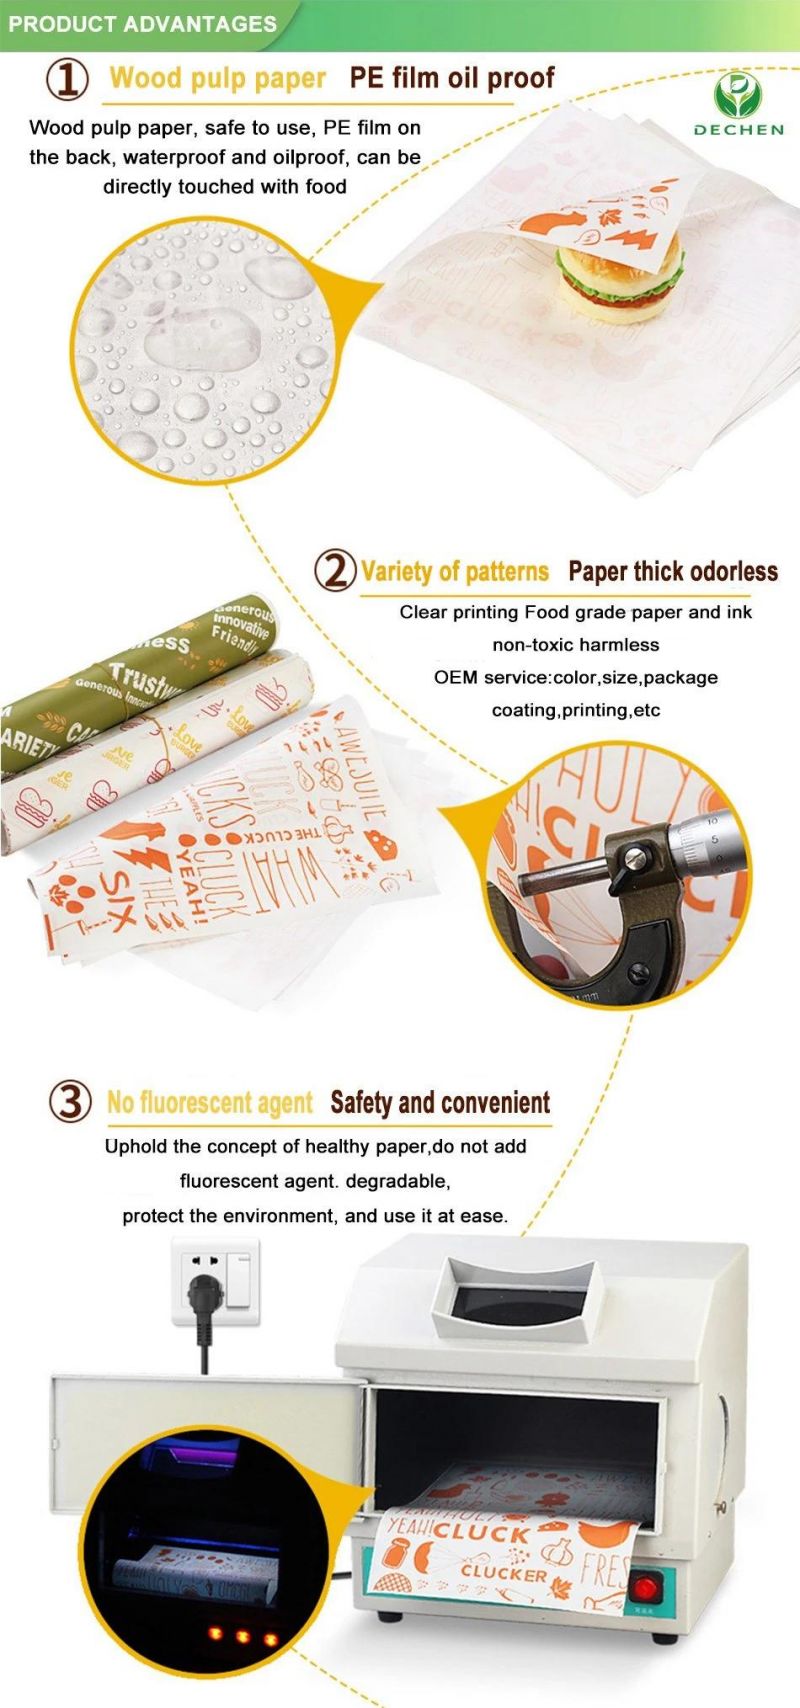 Wax Food Packaging Suppliers Near Me Sandwich Wrapping Paper